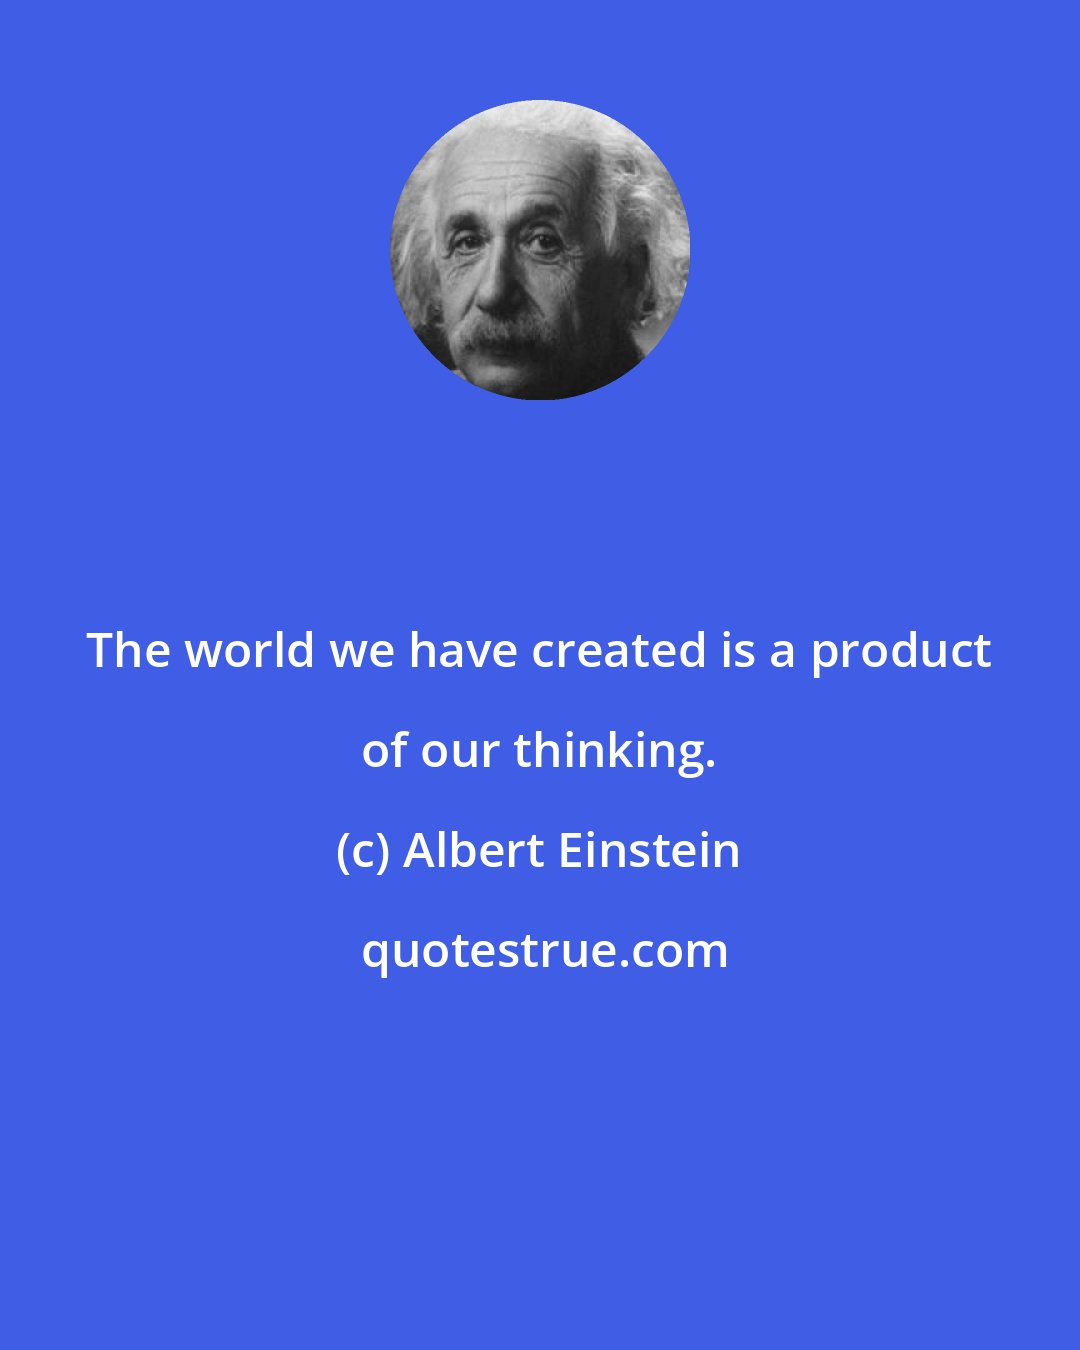 Albert Einstein: The world we have created is a product of our thinking.